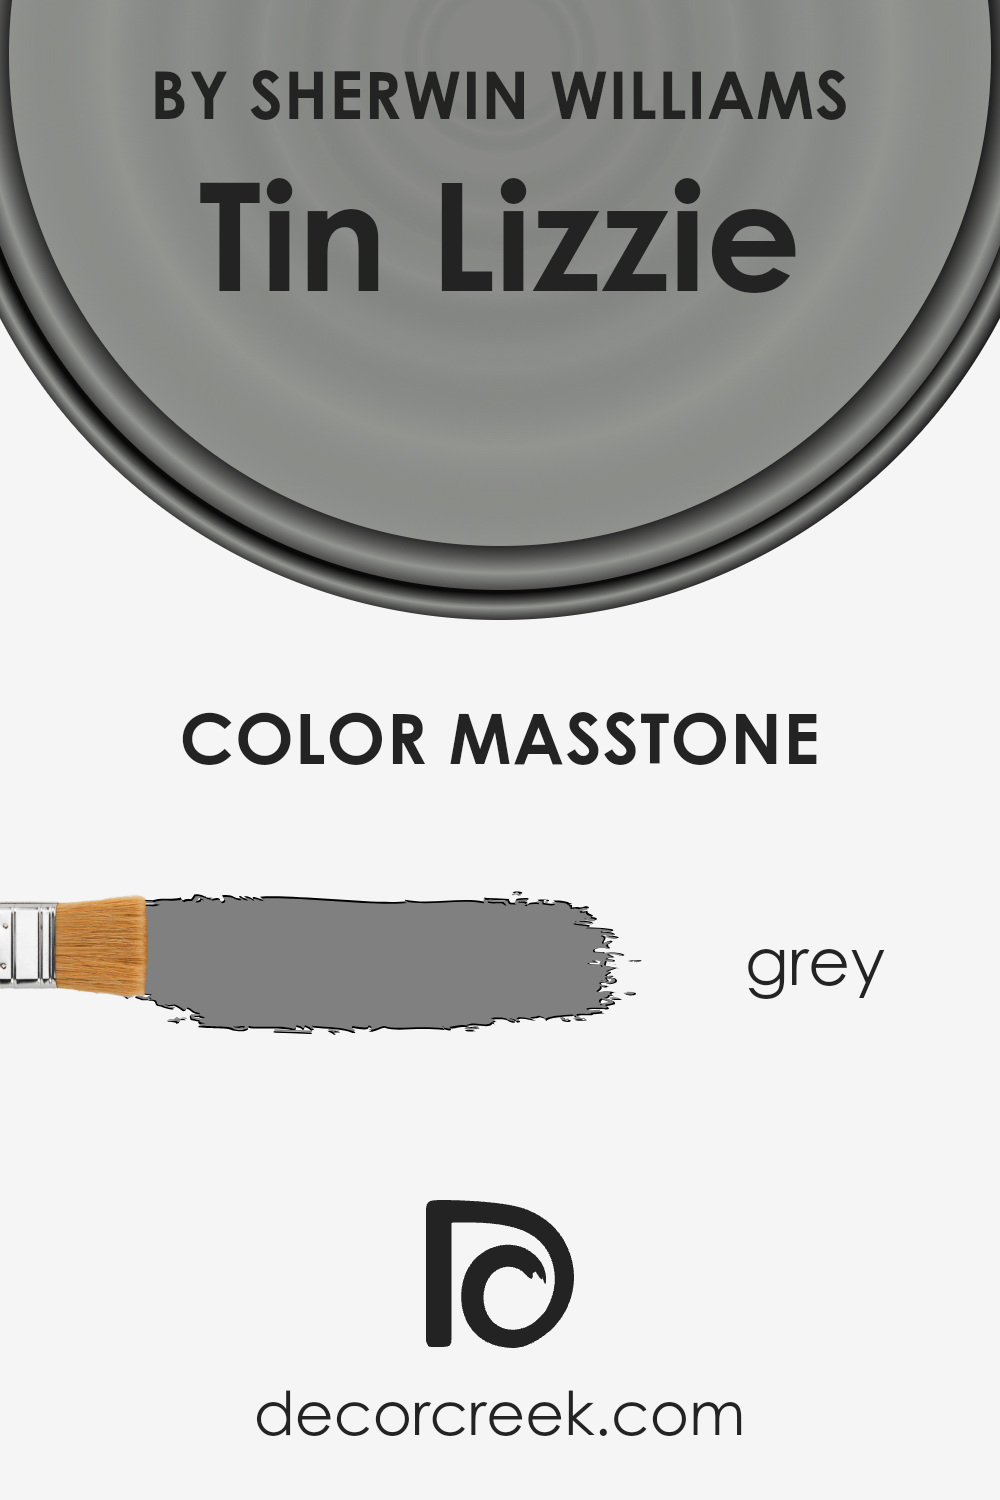 what_is_the_masstone_of_tin_lizzie_sw_9163